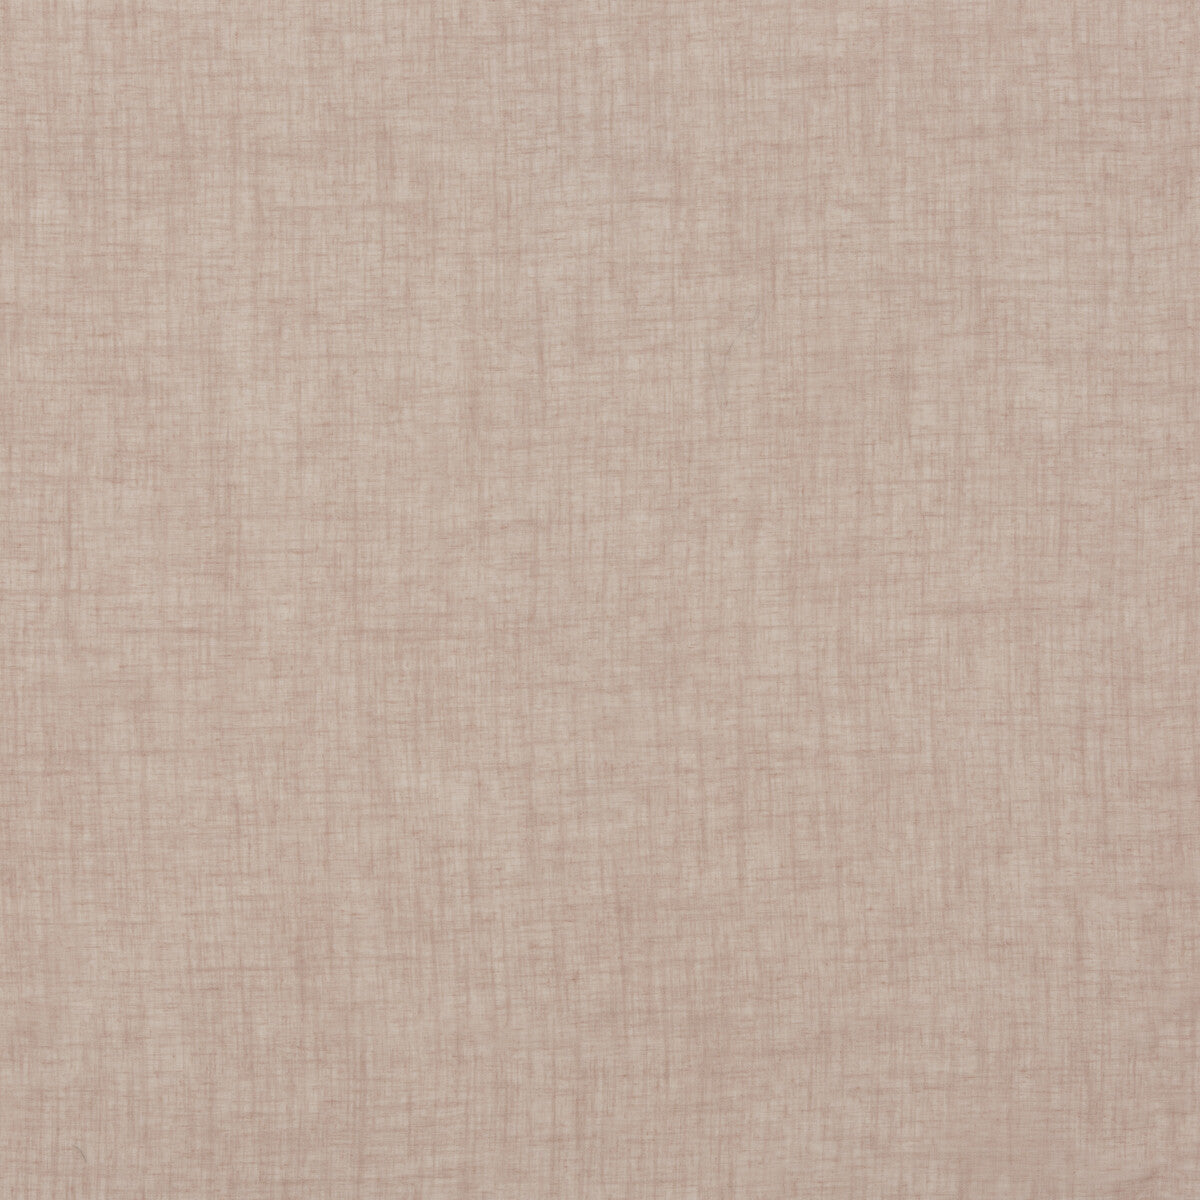 Kelso fabric in blush color - pattern PV1005.440.0 - by Baker Lifestyle in the Notebooks collection